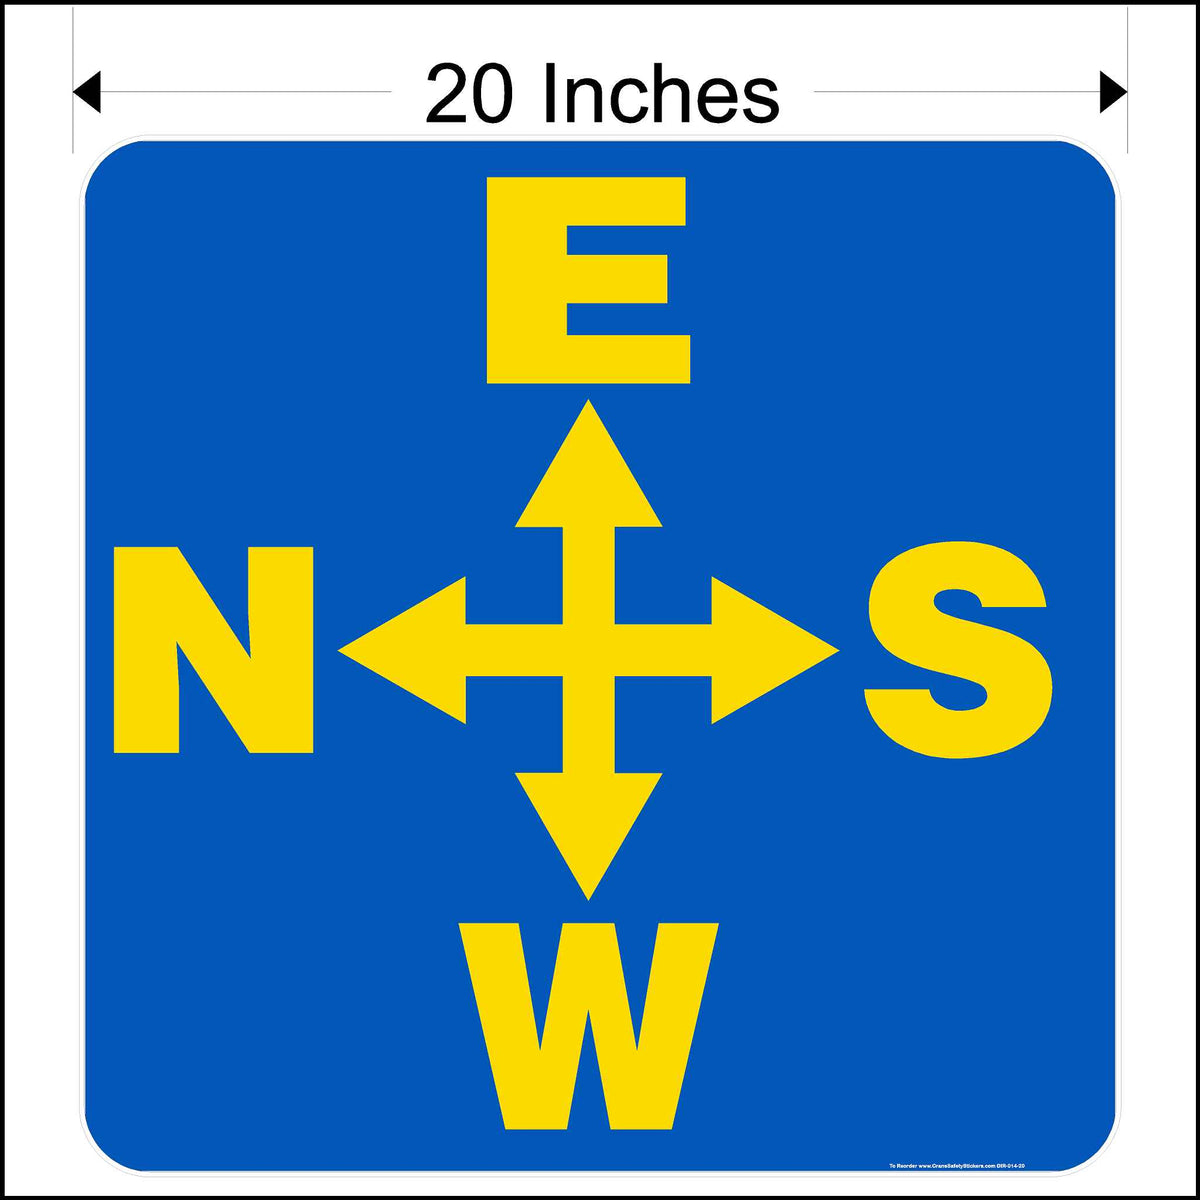 20 Inch overhead crane directional decal. Printed with yellow East, South, West, and North Arrows on a blue background.